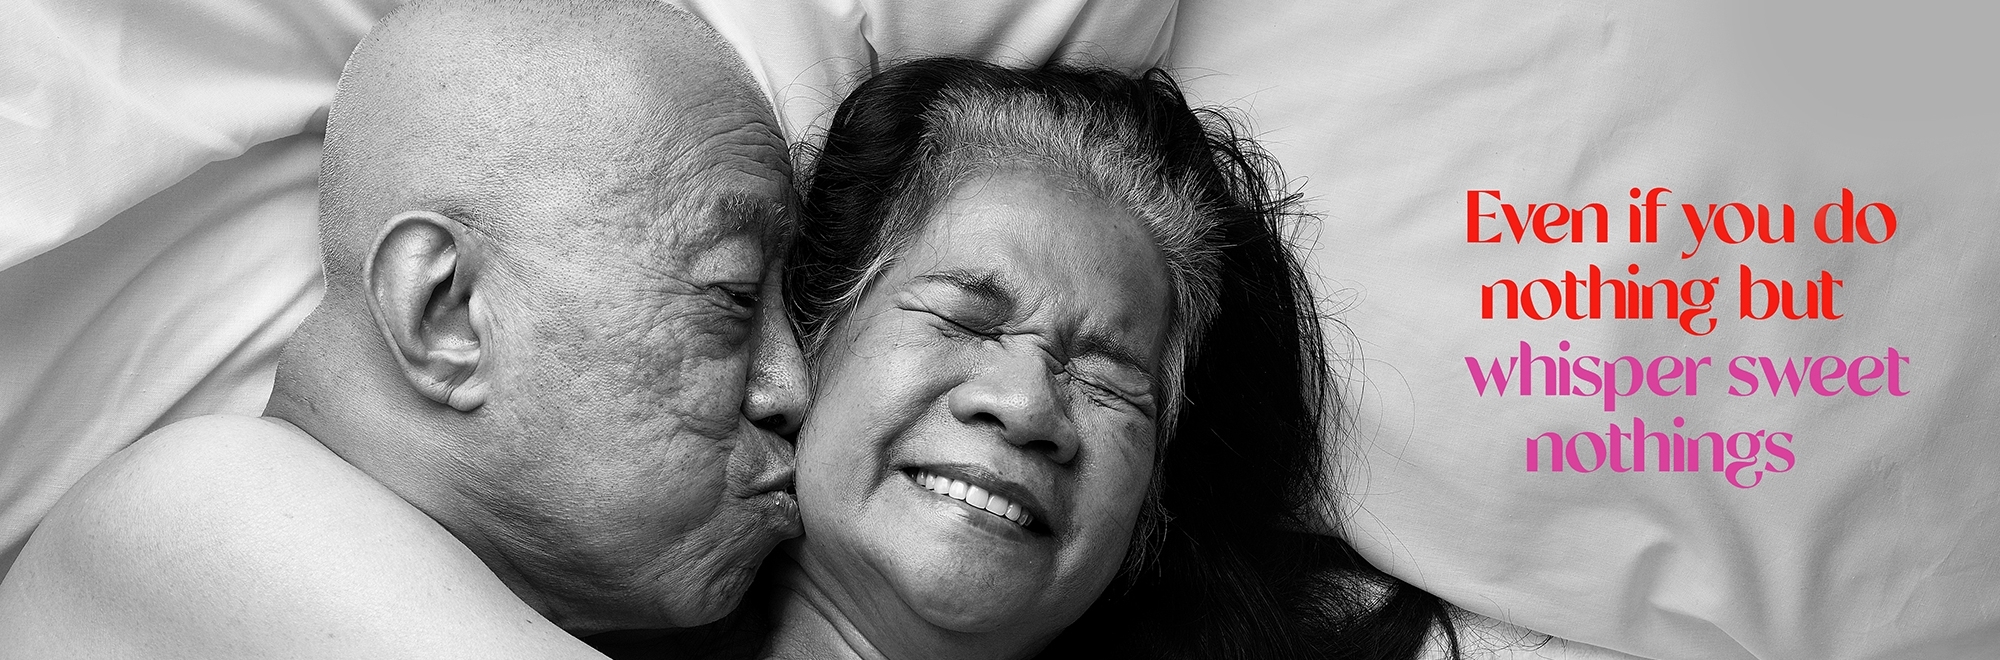 Let's talk about sex: The joy of later life intimacy explored in campaign by Relate, Rankin and Ogilvy UK